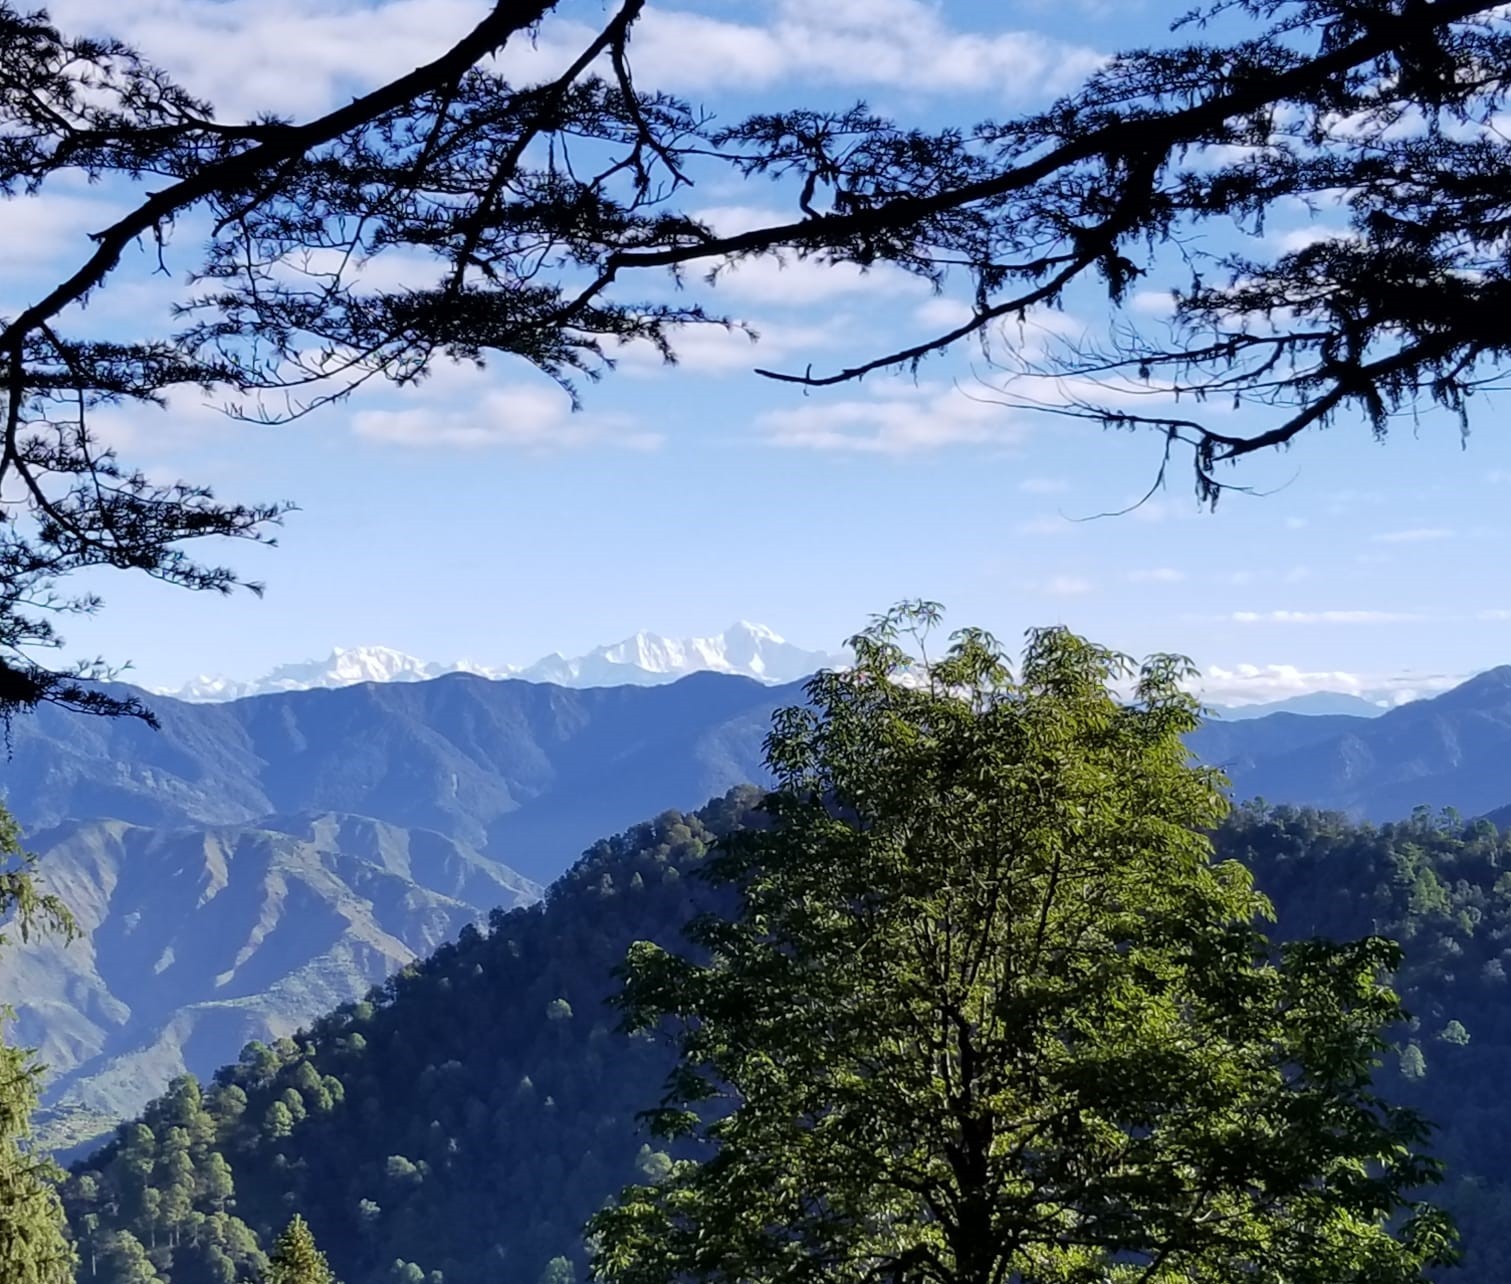 View of Himalayas in India